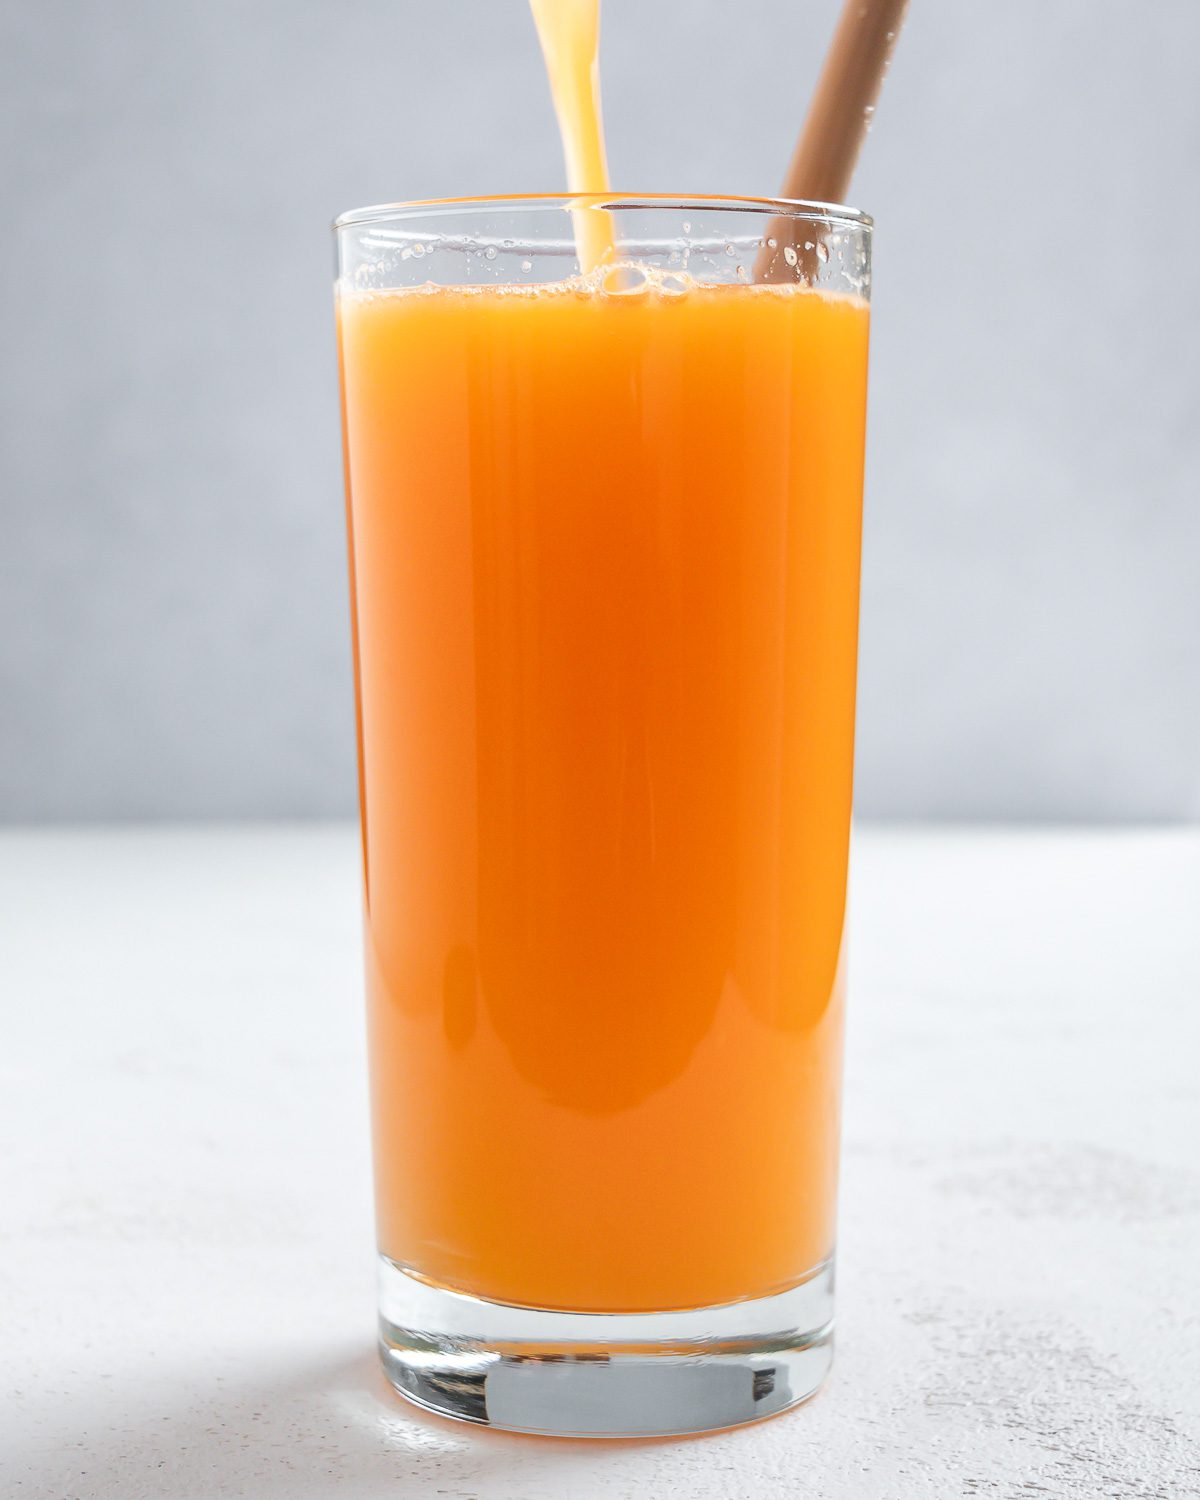 completed Apple OJ Carrot Juice in a glass against a white surface and light background